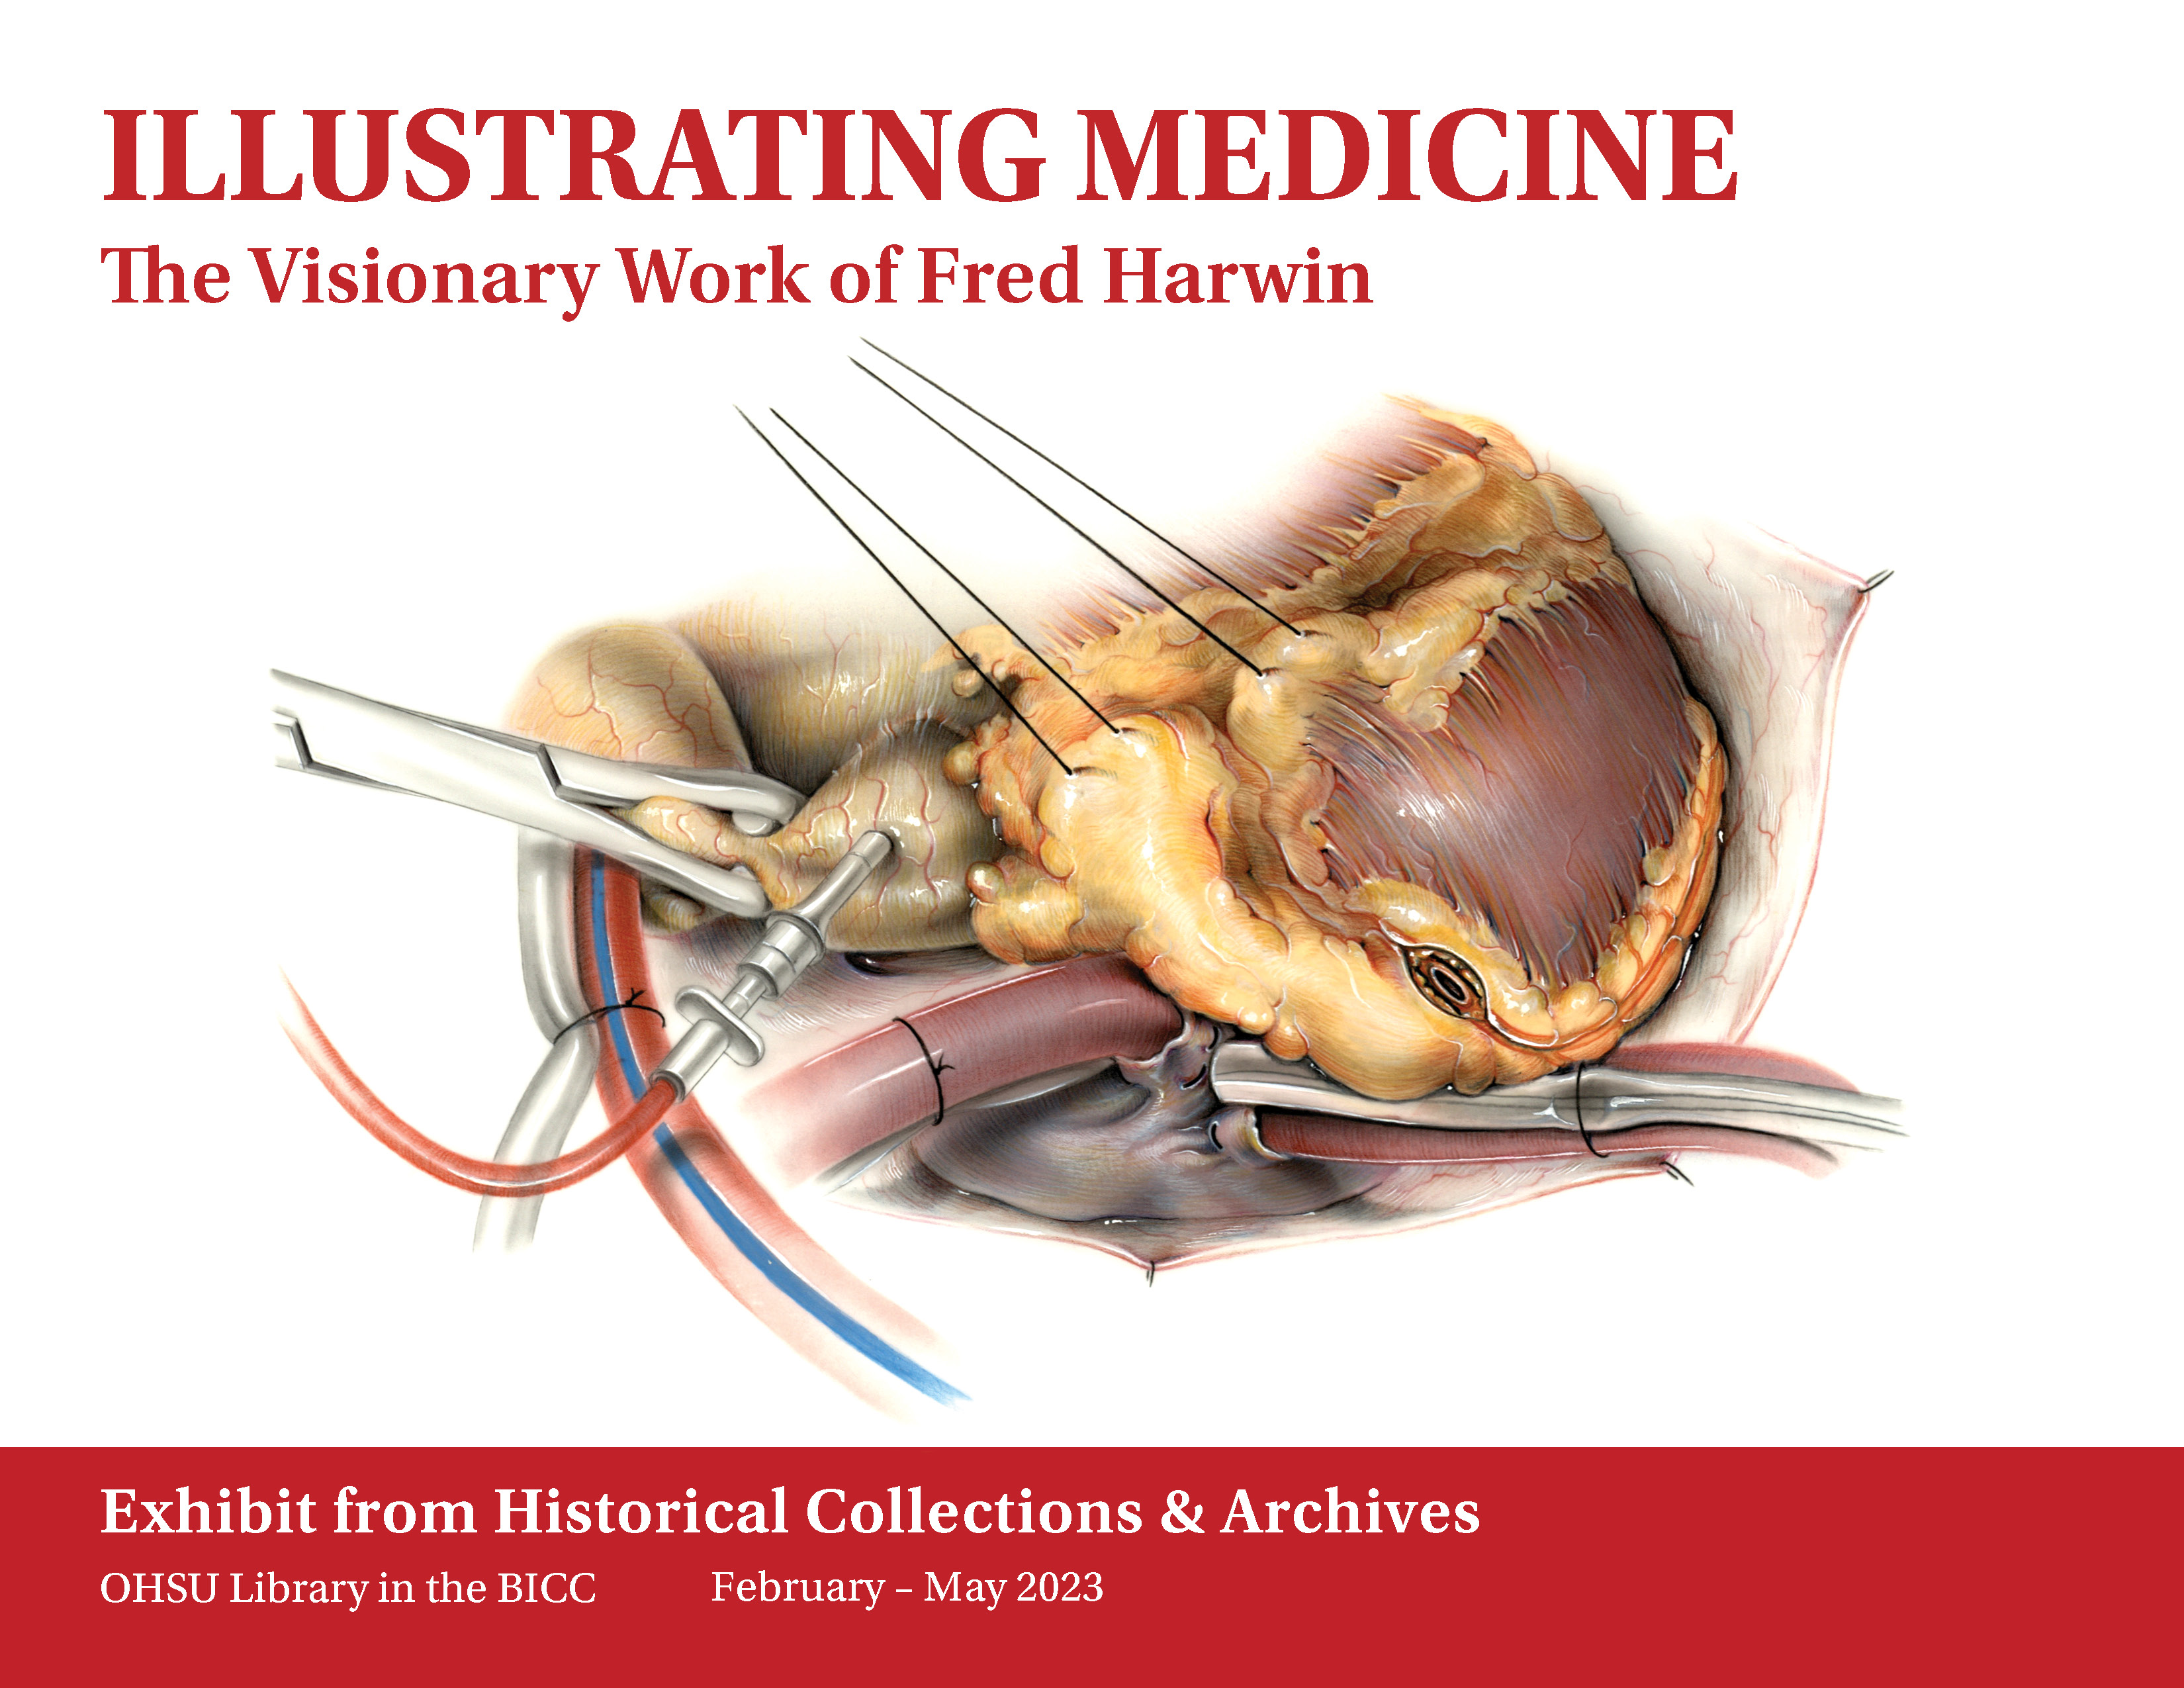 'Illustrating Medicine: The Visionary Work of Fred Harwin. Exhibit from Historical Collections & Archives. OHSU Library in the BICC. February - May 2023." Illustration of open heart surgery in center.